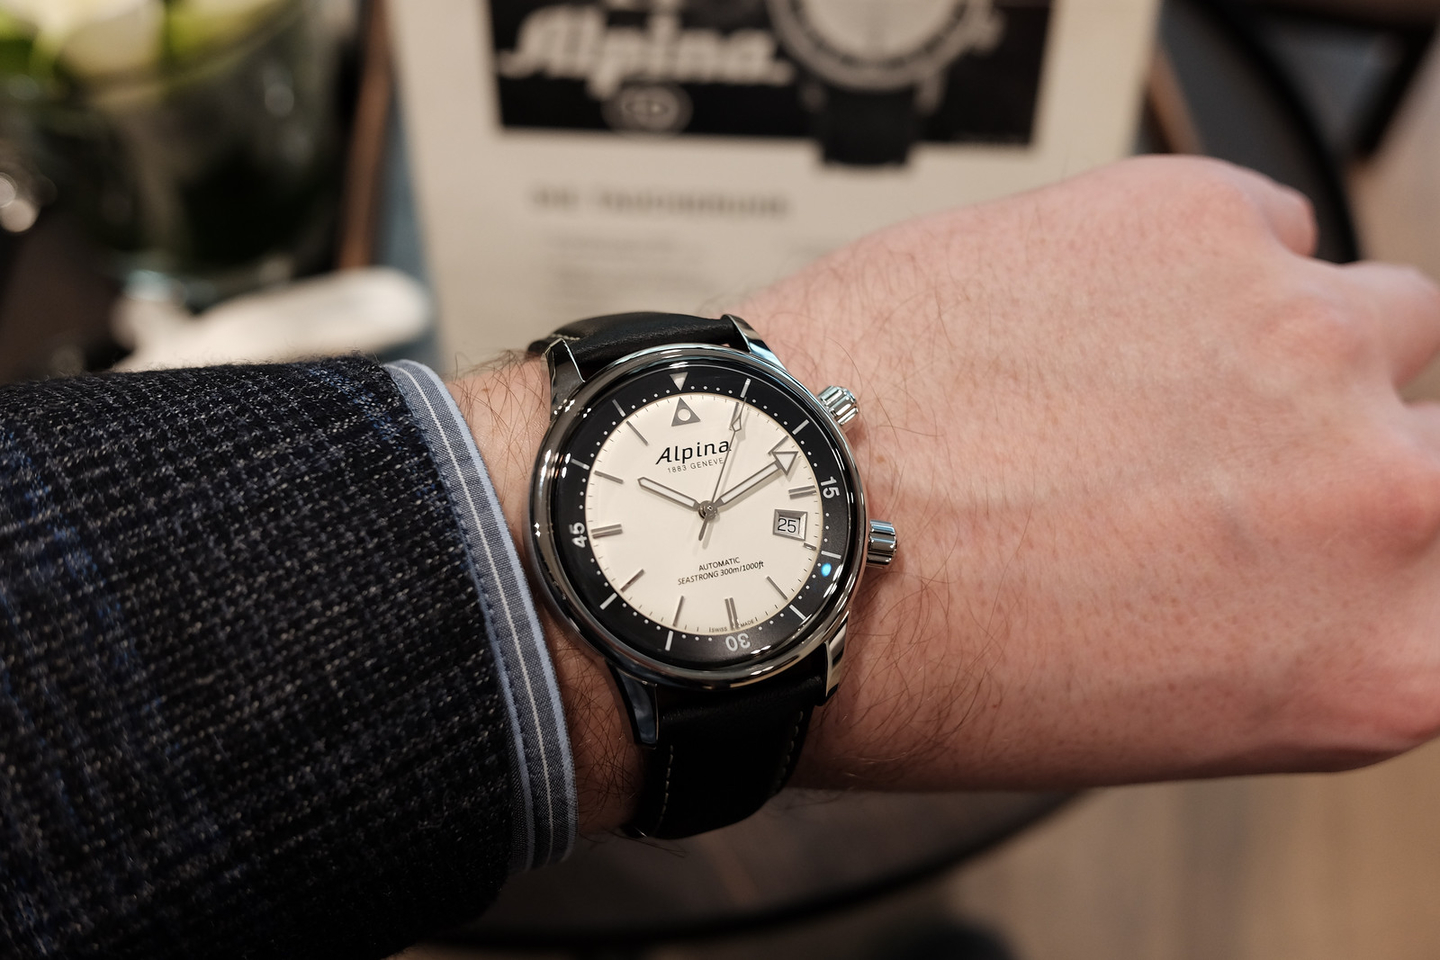 Hands-On with the Alpina Seastrong Diver Heritage at Baselworld